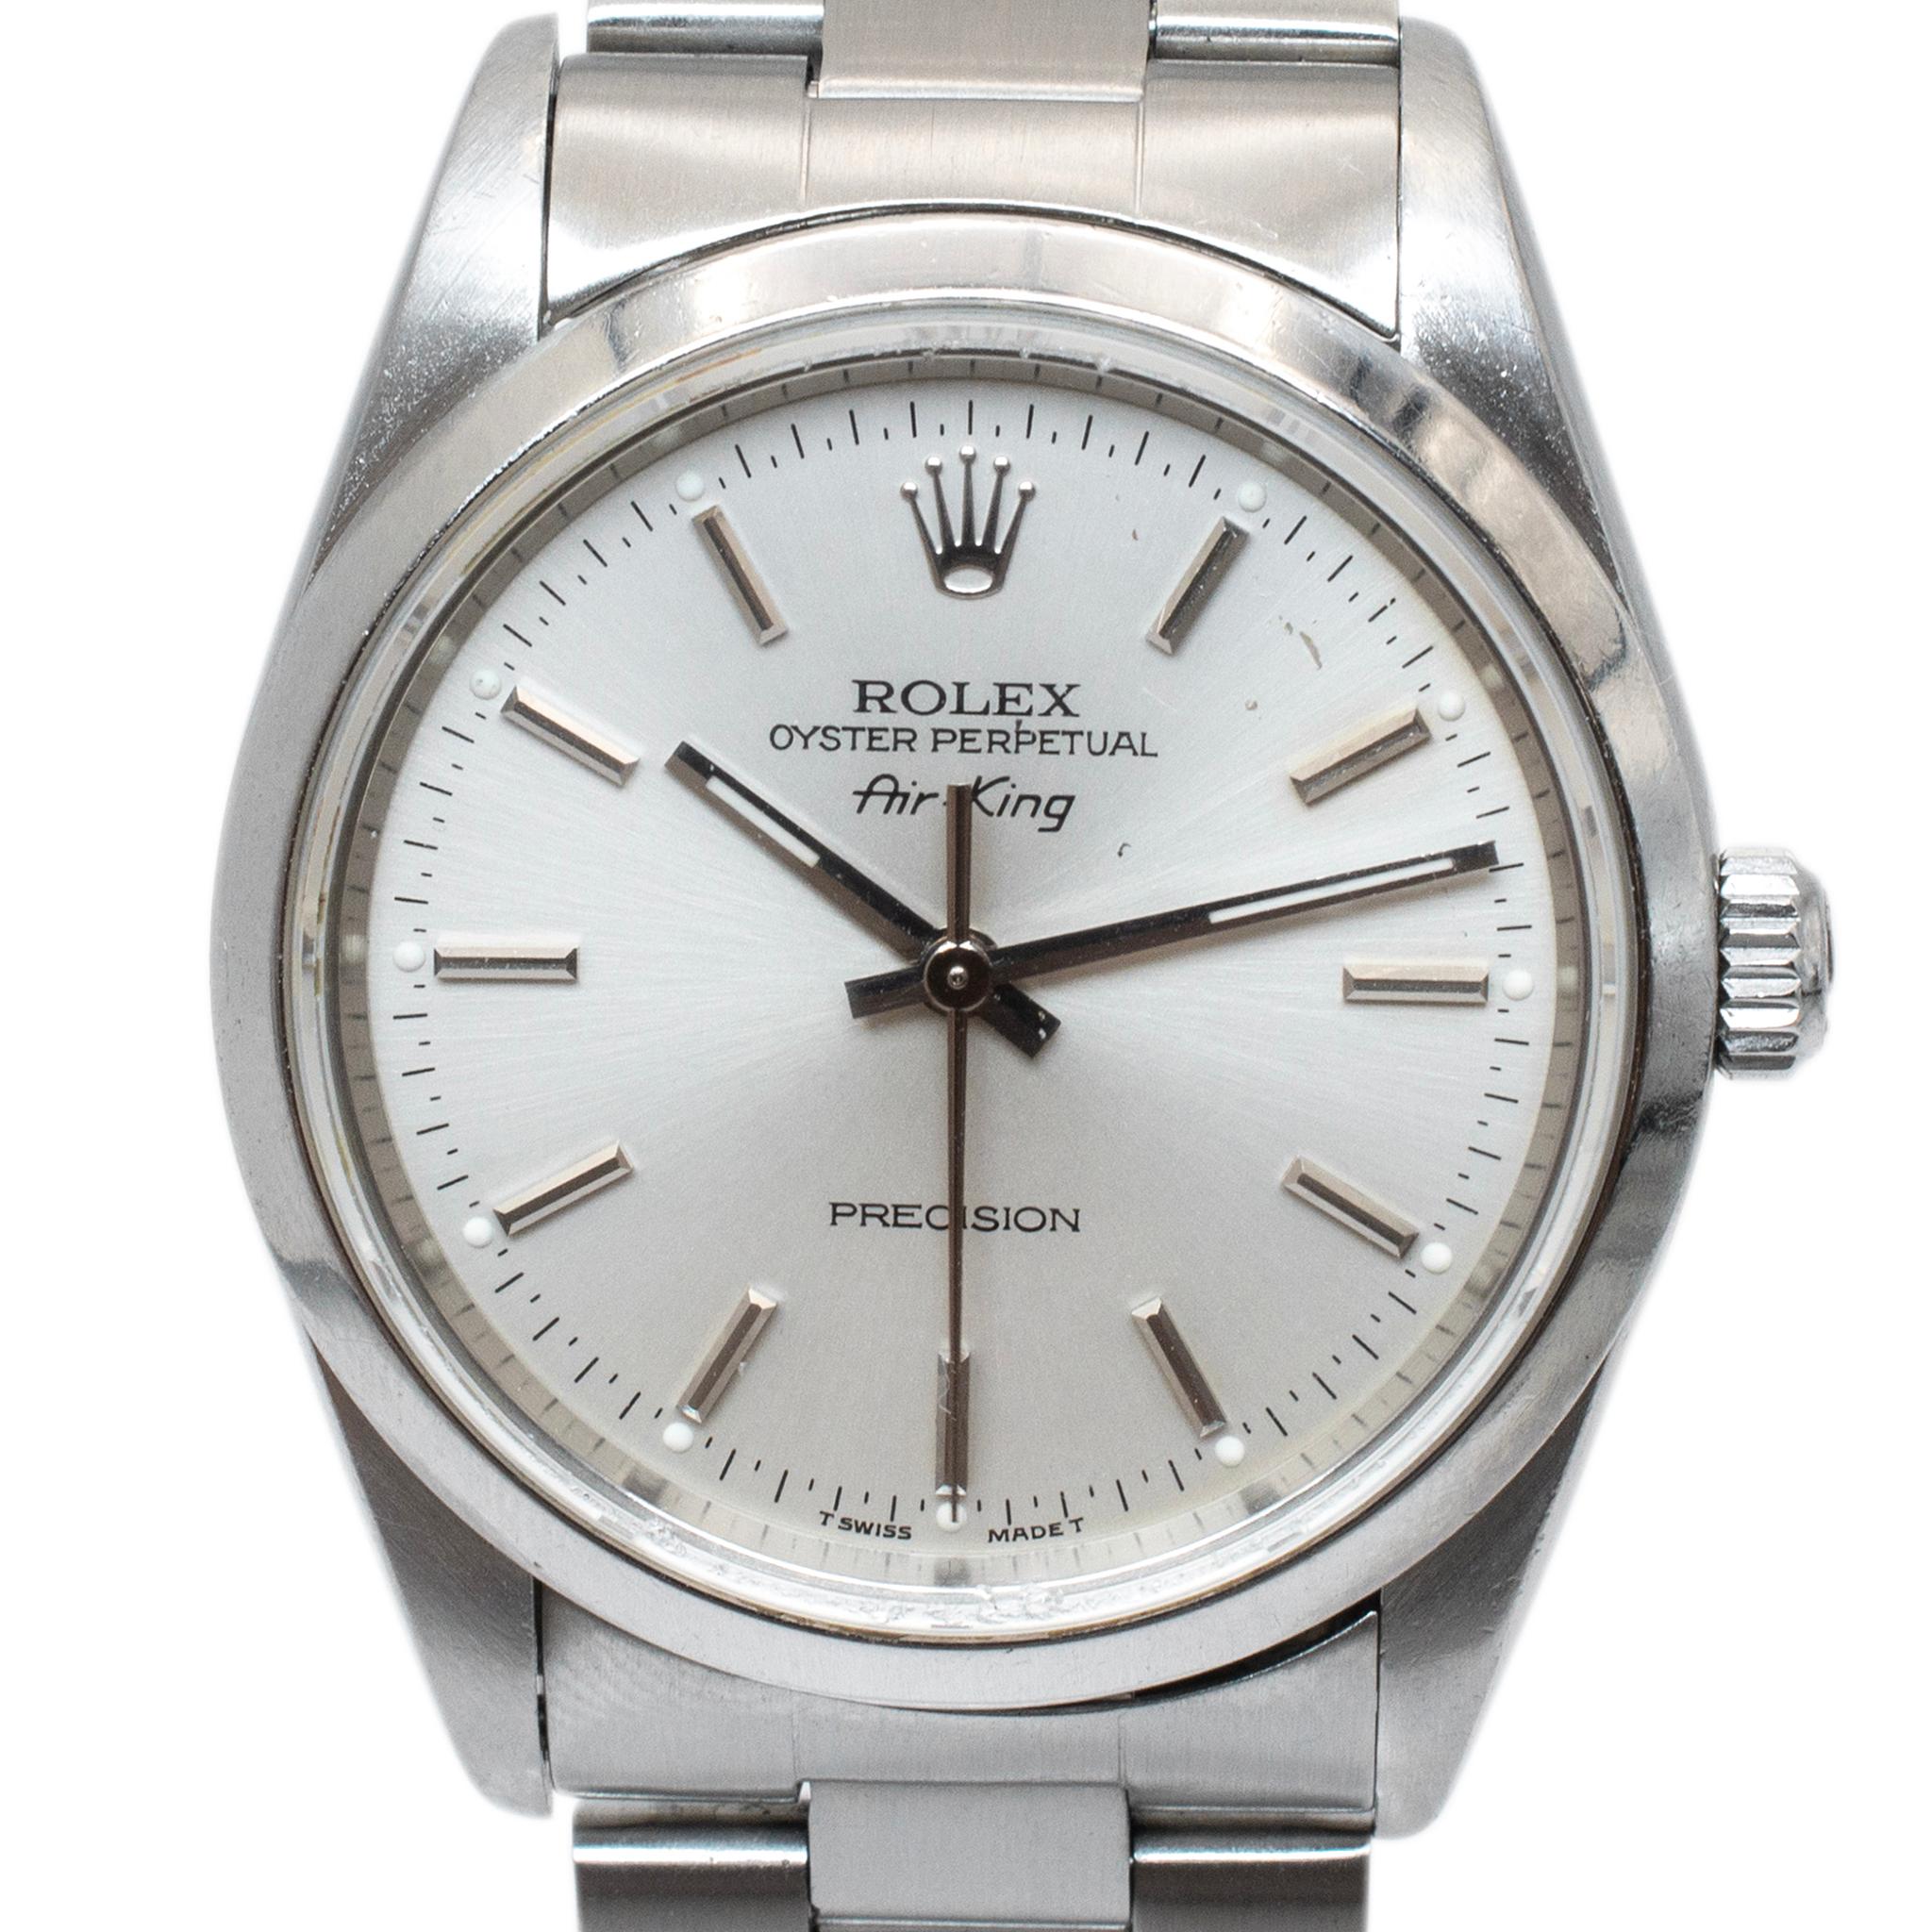 Brand: Rolex

Gender: Unisex

Metal Type: Stainless Steel

Diameter: 34.00 mm

Weight: 90.63 Grams

Stainless steel ROLEX Swiss made watch with original box. The metal was tested and determined to be stainless steel. The 